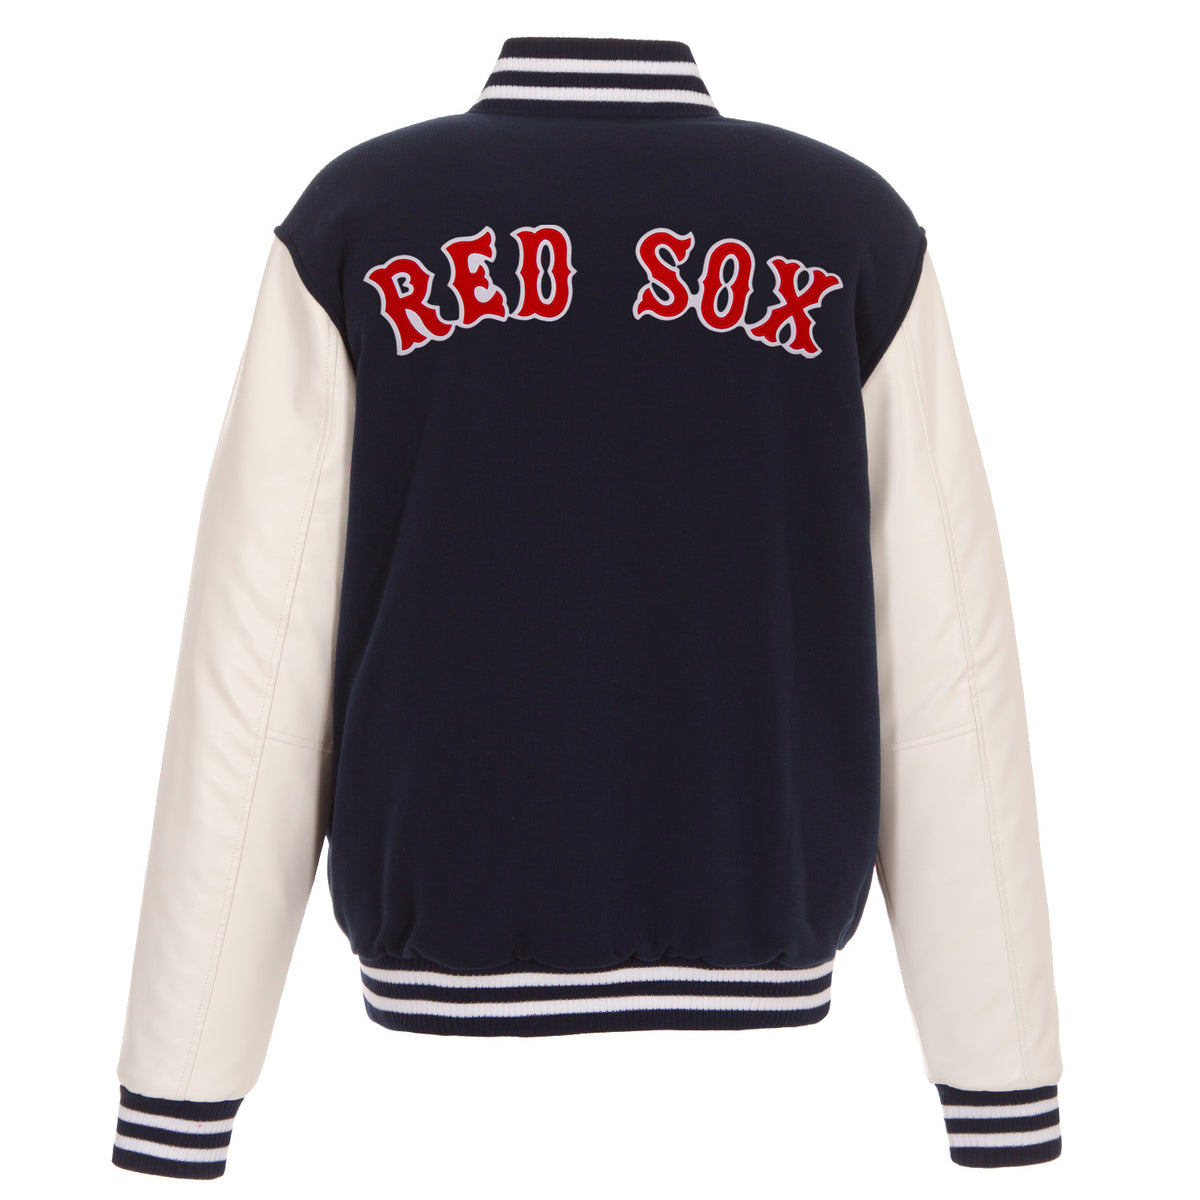 Boston Red Sox - JH Design Reversible Fleece Jacket with Faux Leather Sleeves - Navy/White X-Large